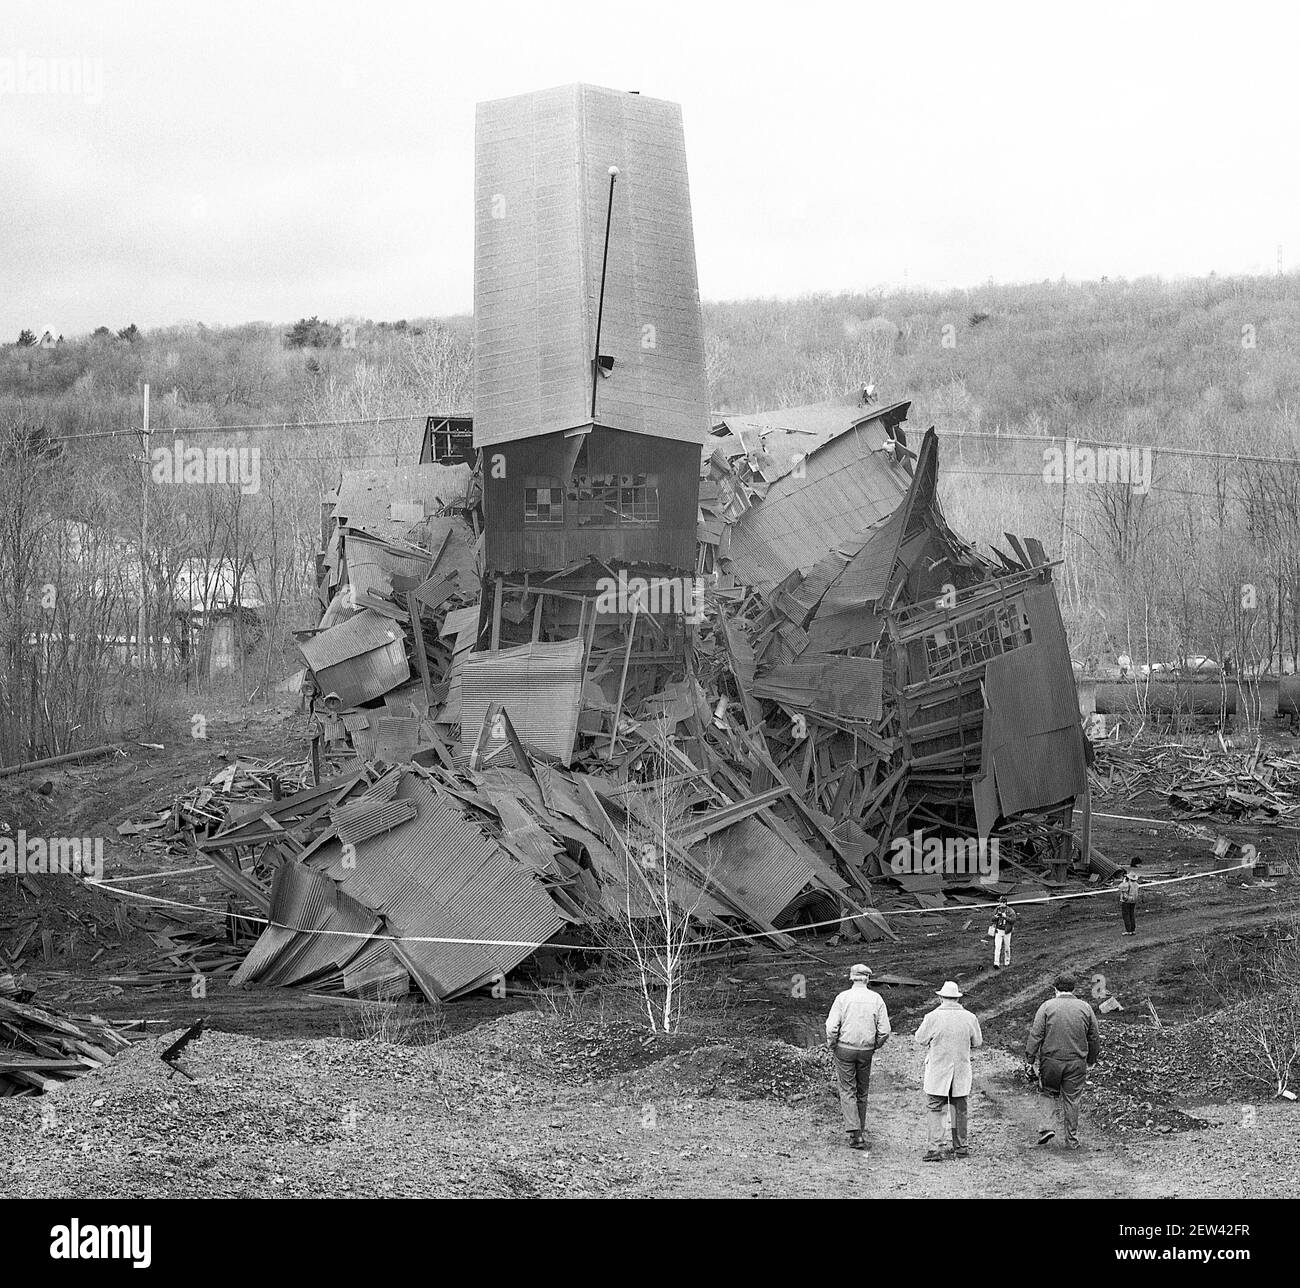 The Demolition of the Harry E. Coal Breaker Also known as “The Bucket Of Blood” April 14 1995 at Swoyersville Pennsylvania. USA . Anthracite Coal Region of Wyoming Valley Pennsylvania. Stock Photo